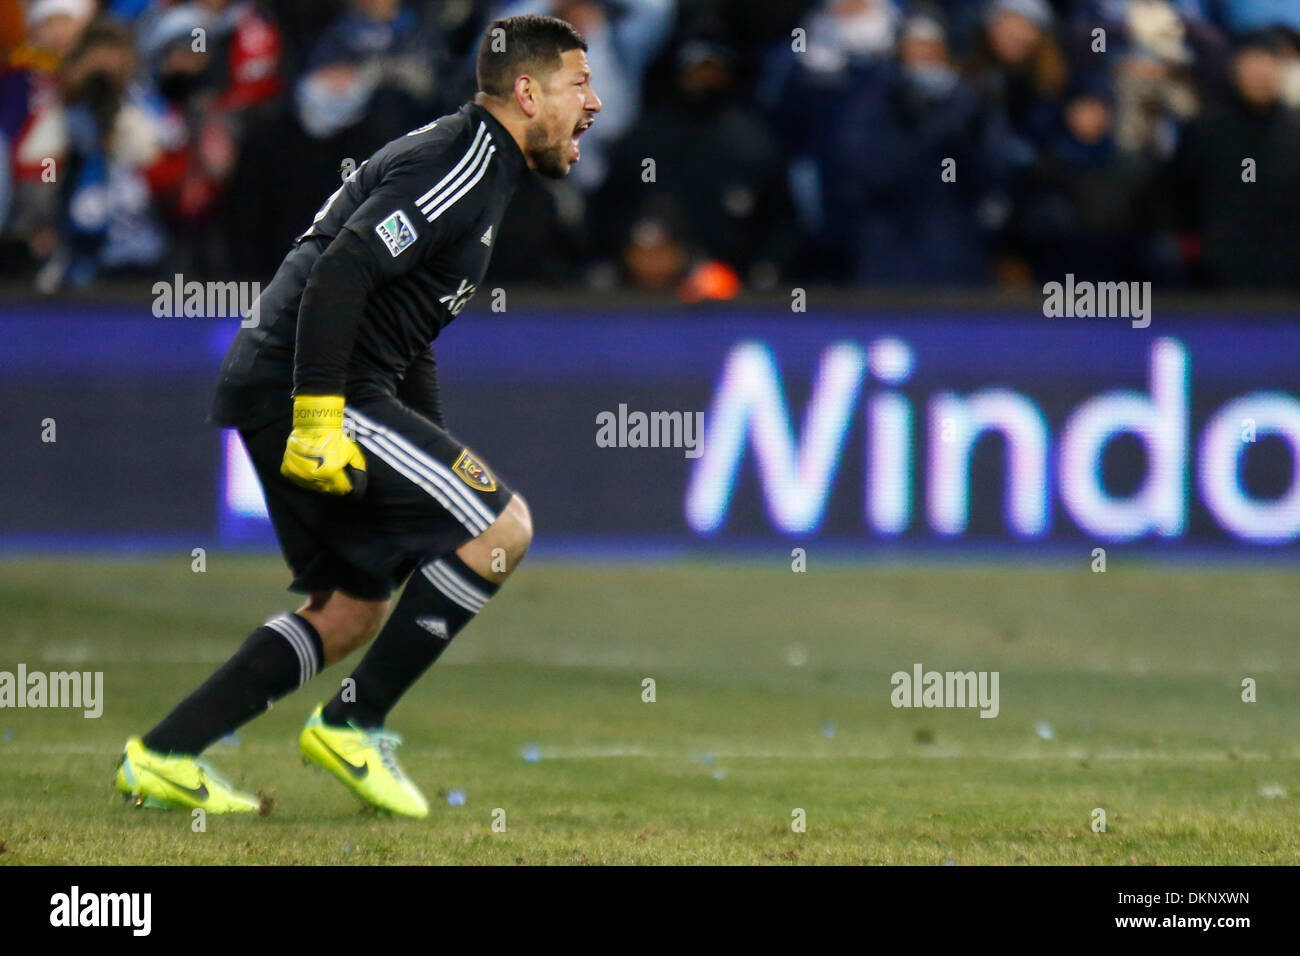 Kansas City, KS, USA. 7th Dec, 2013. December 07, 2013: Nick Rimando #18 of the Real Salt Lake reacts to his blocked shot on goal in shootouts during the MLS Championship game on December 07, 2013 at Sporting Park in Kansas City, Kansas. Credit:  csm/Alamy Live News Stock Photo